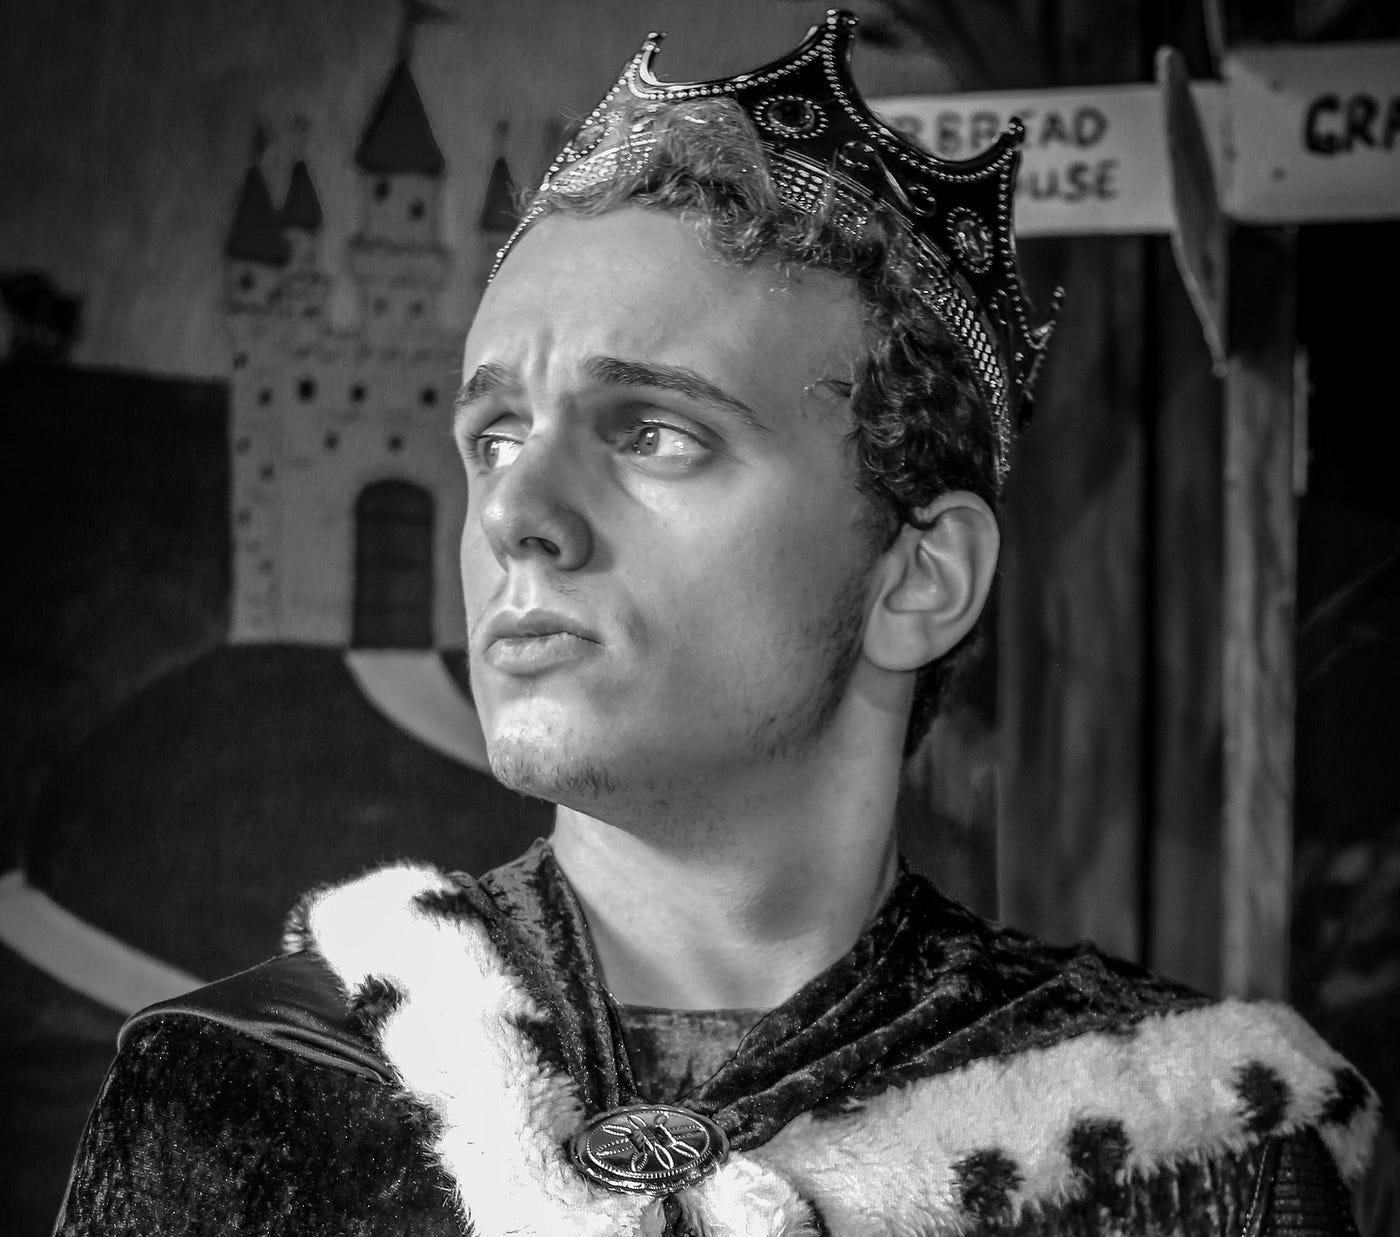 A young man in a crown and ermine robe glances sideways, seemingly bored.